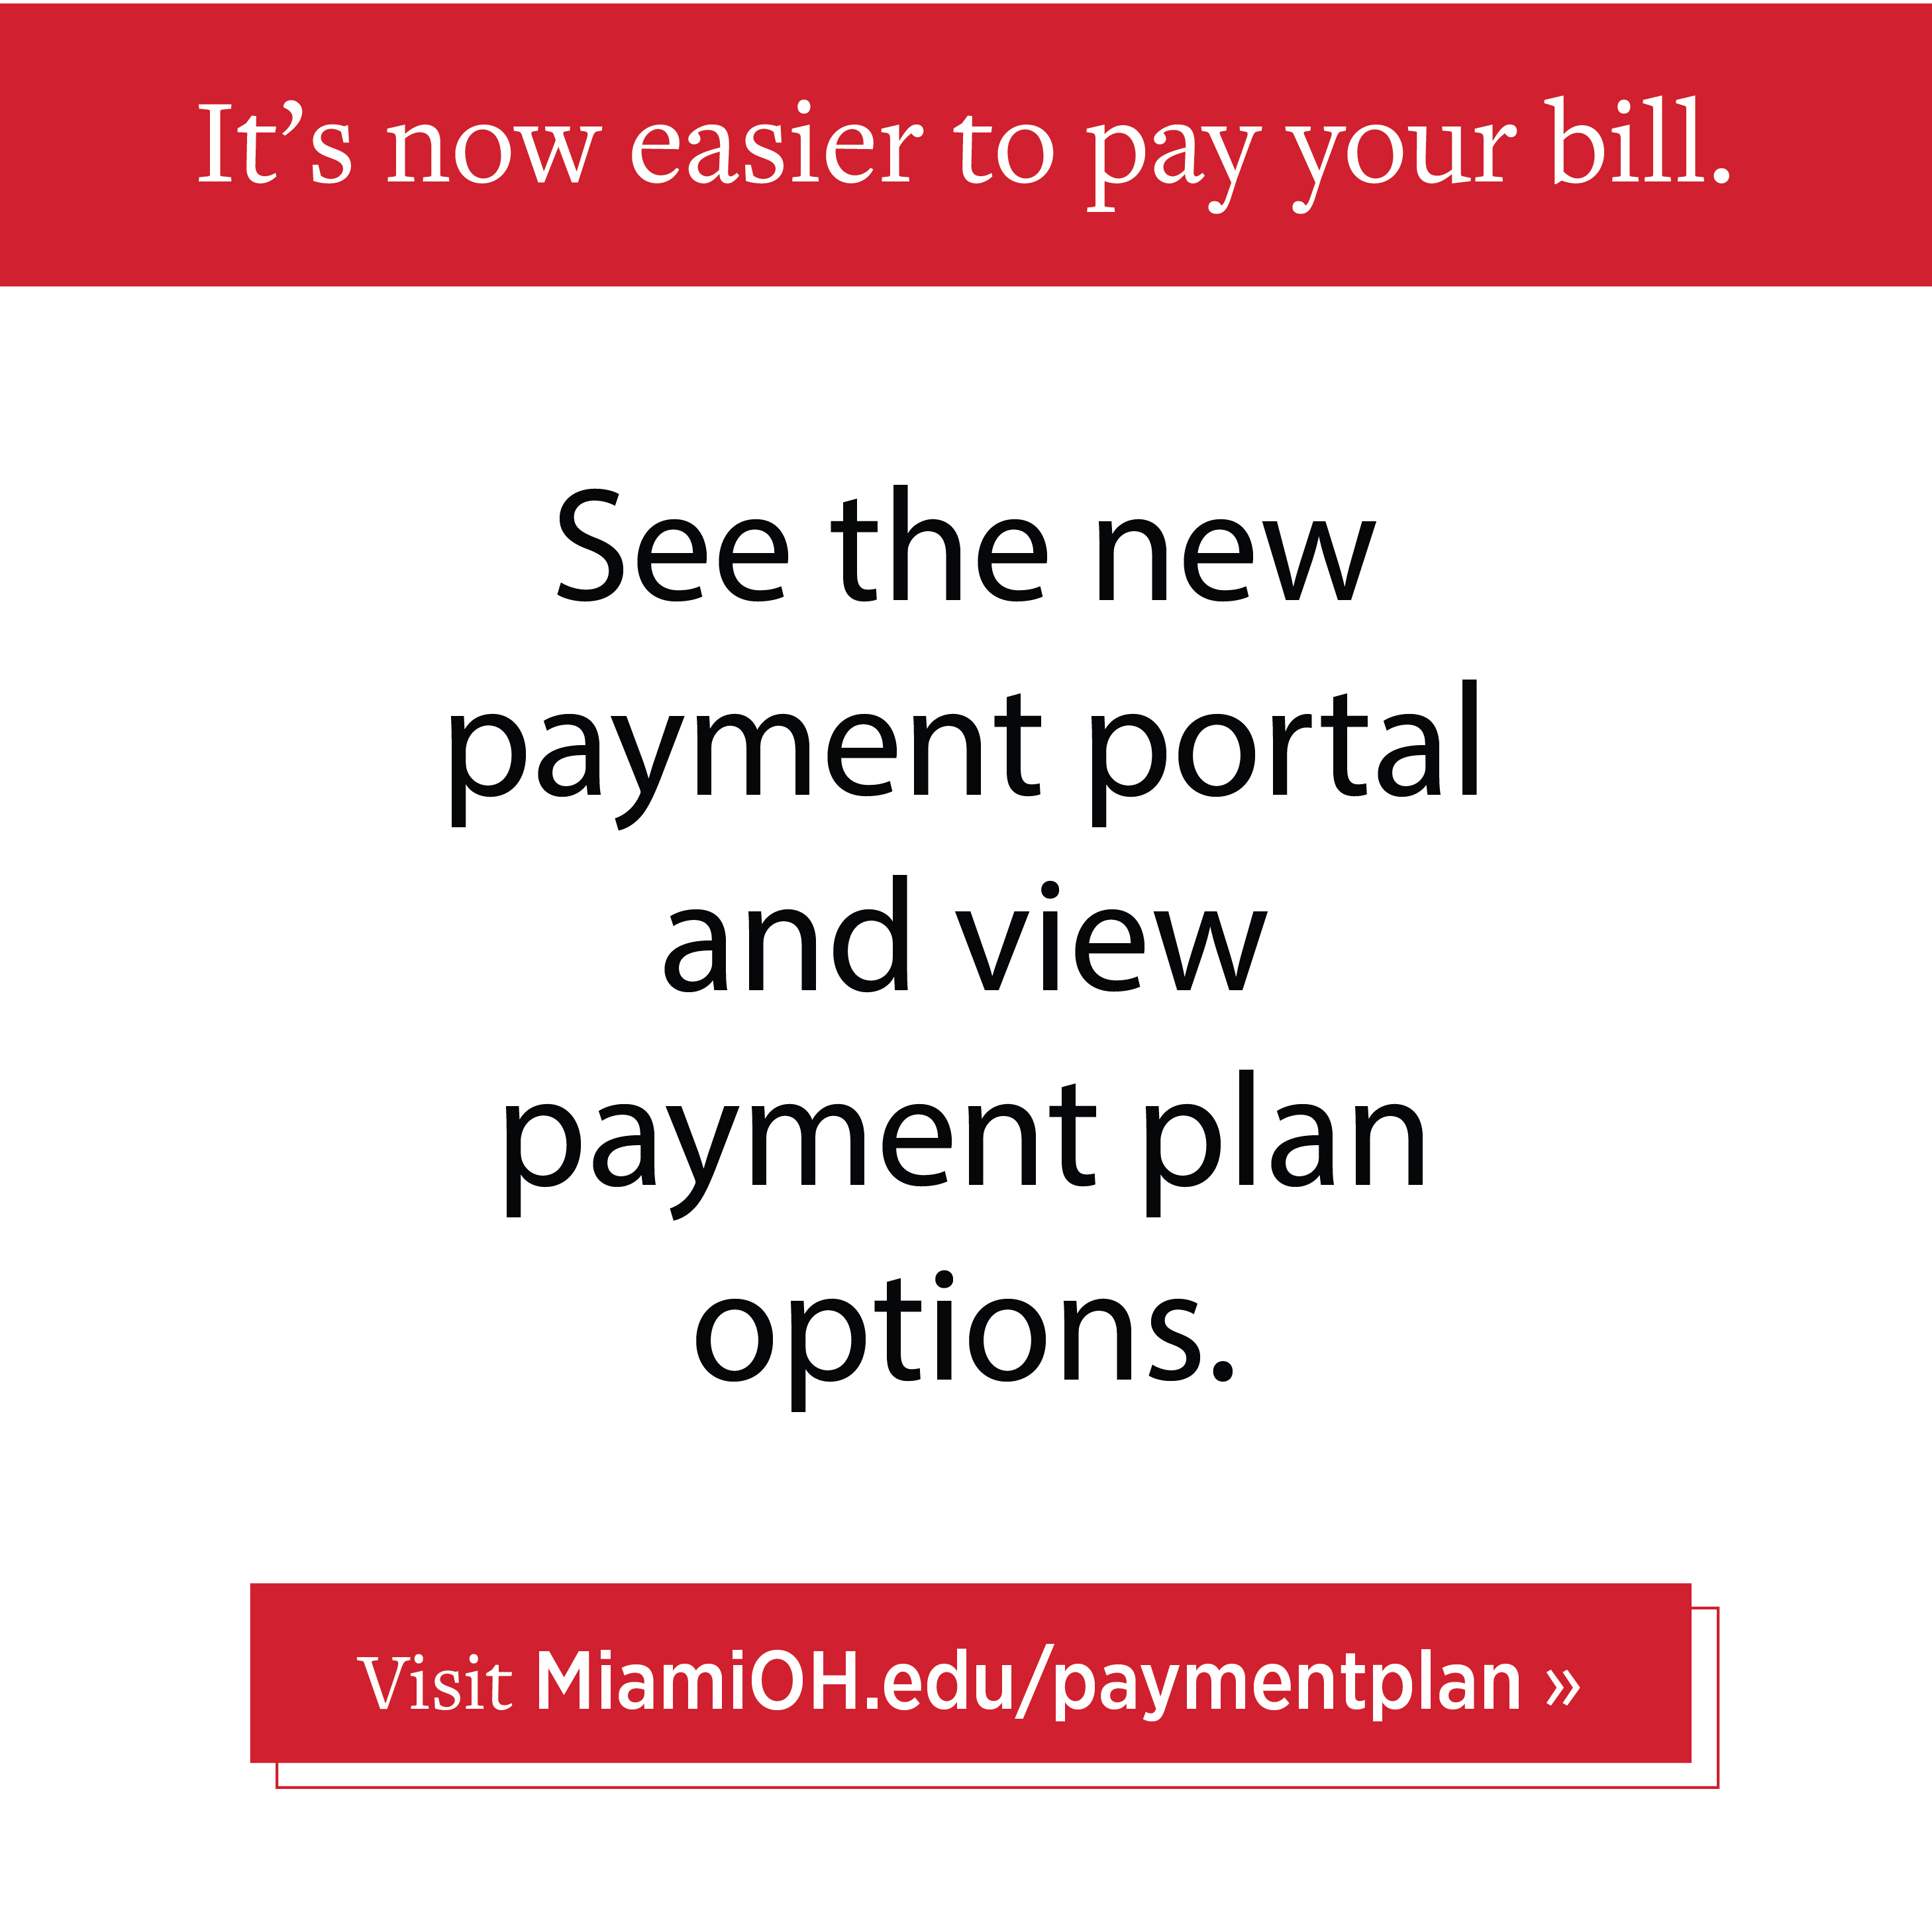  It's now easier to pay your bill. See the new payment portal and payment plan options. Visit MiamiOH.edu/paymentplan